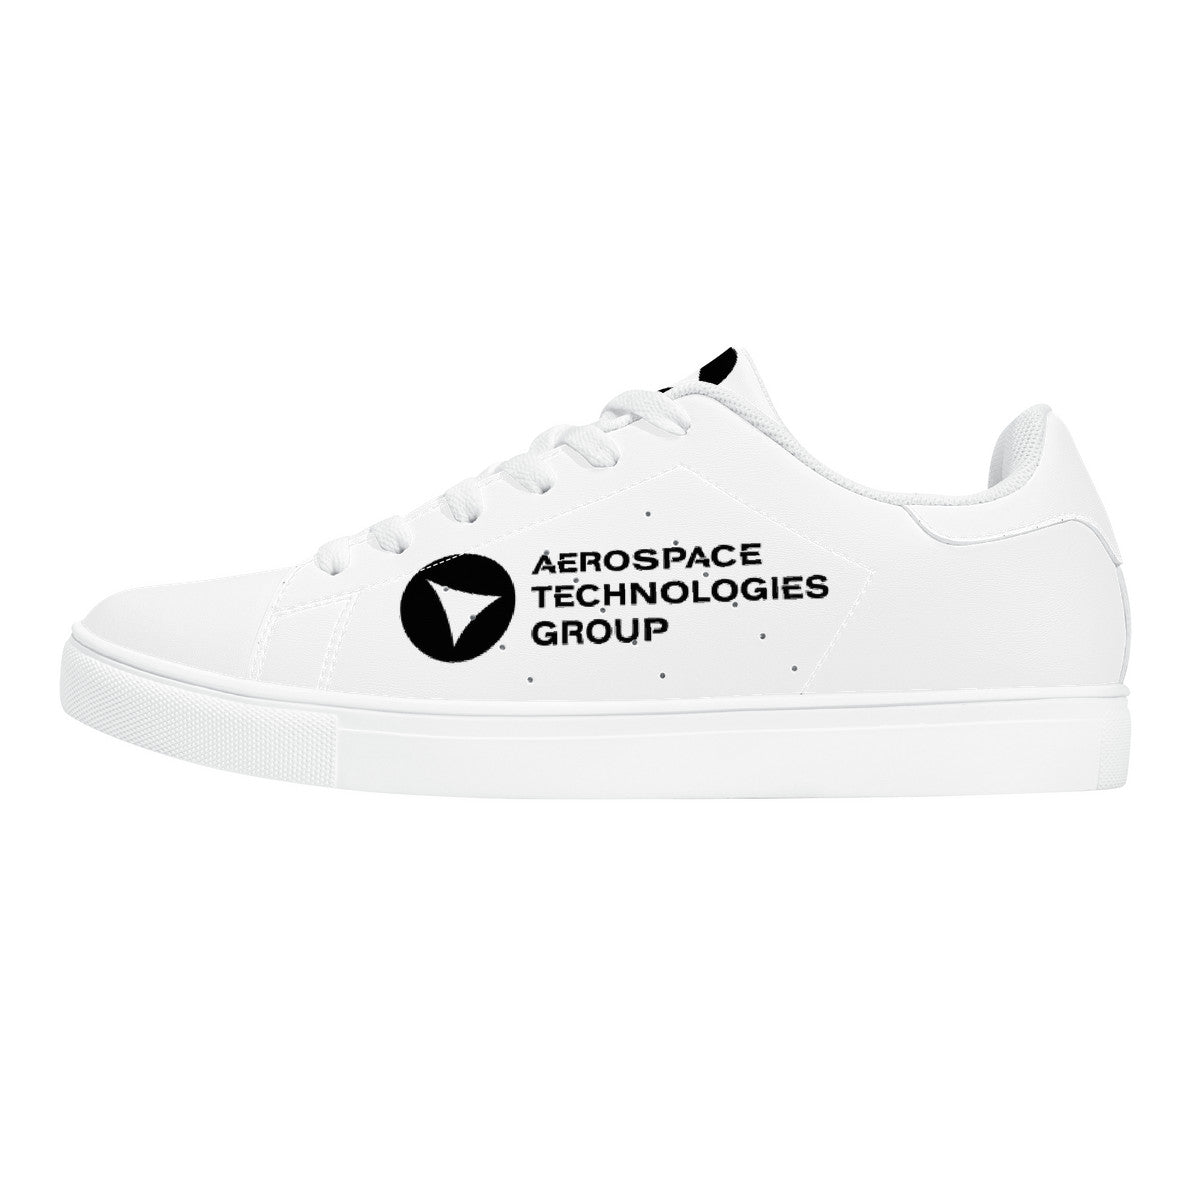 Aerospace Technologies Group - Customized Business Sneakers - White